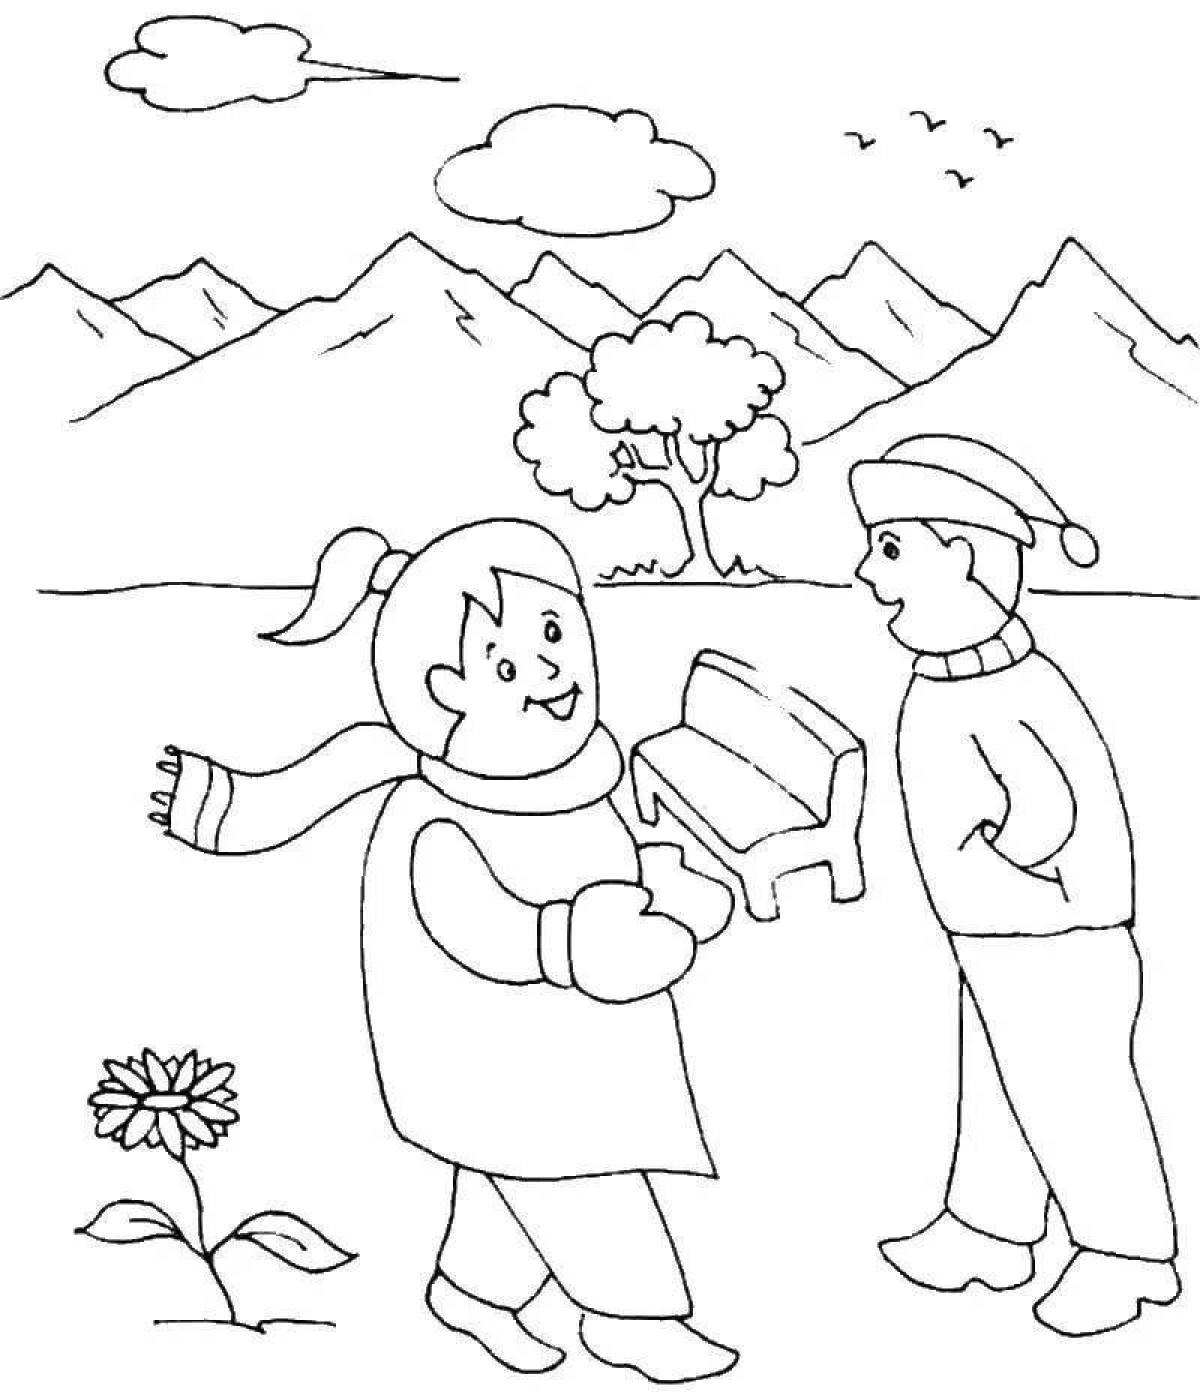 Coloring page stylish kyzygy suretter